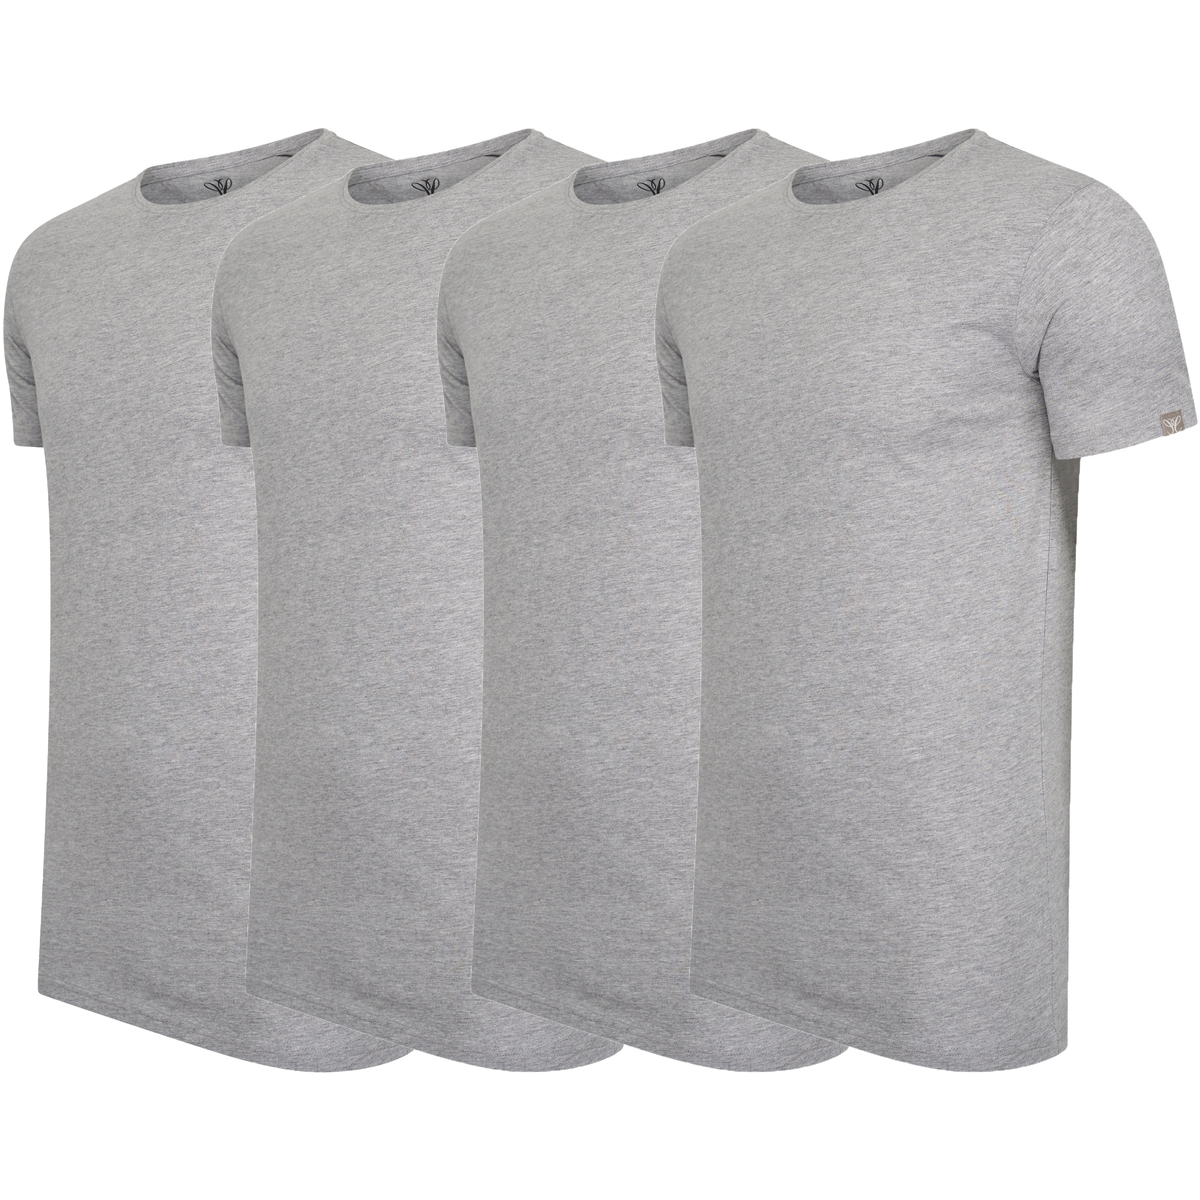 Vêtements Homme Essentials 3-Stripes Pullover French Terry 4-Pack T-shirts Gris